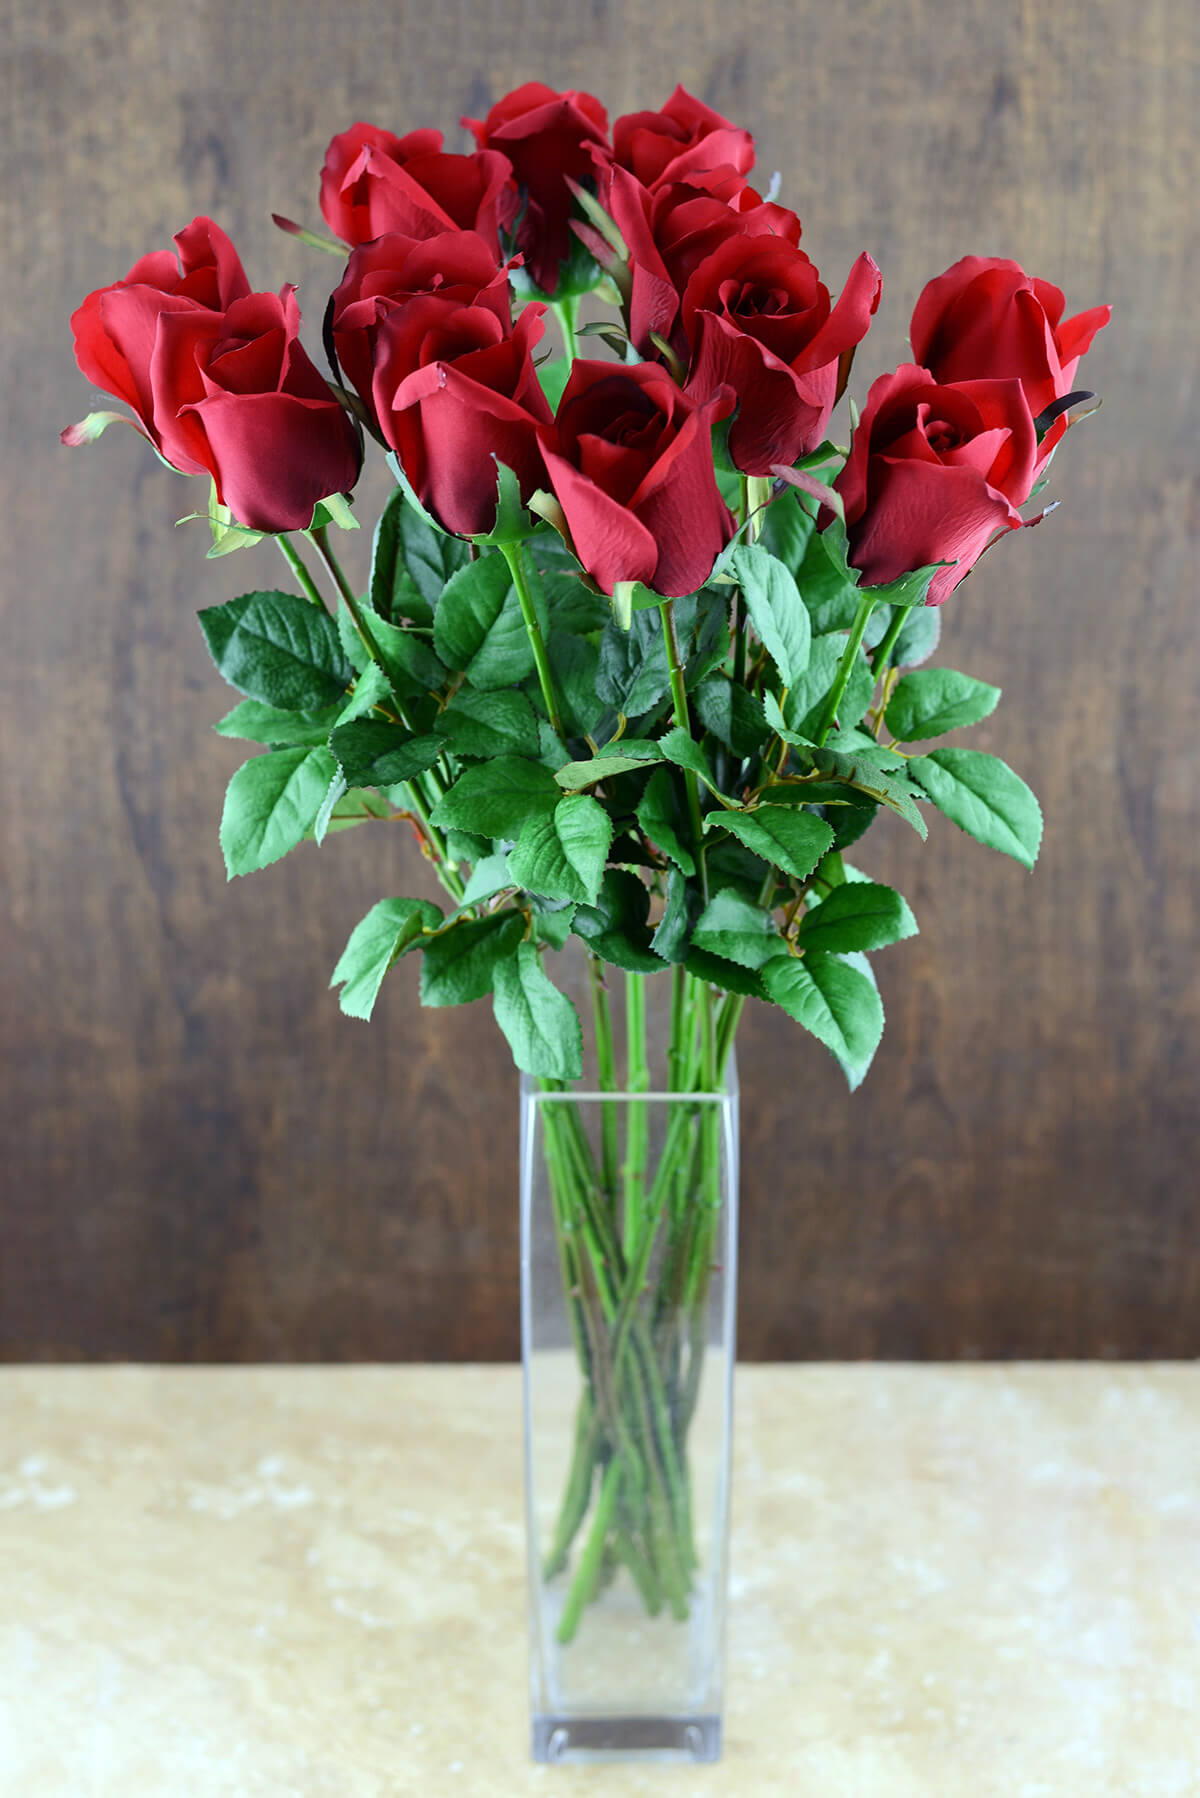 roses with stems